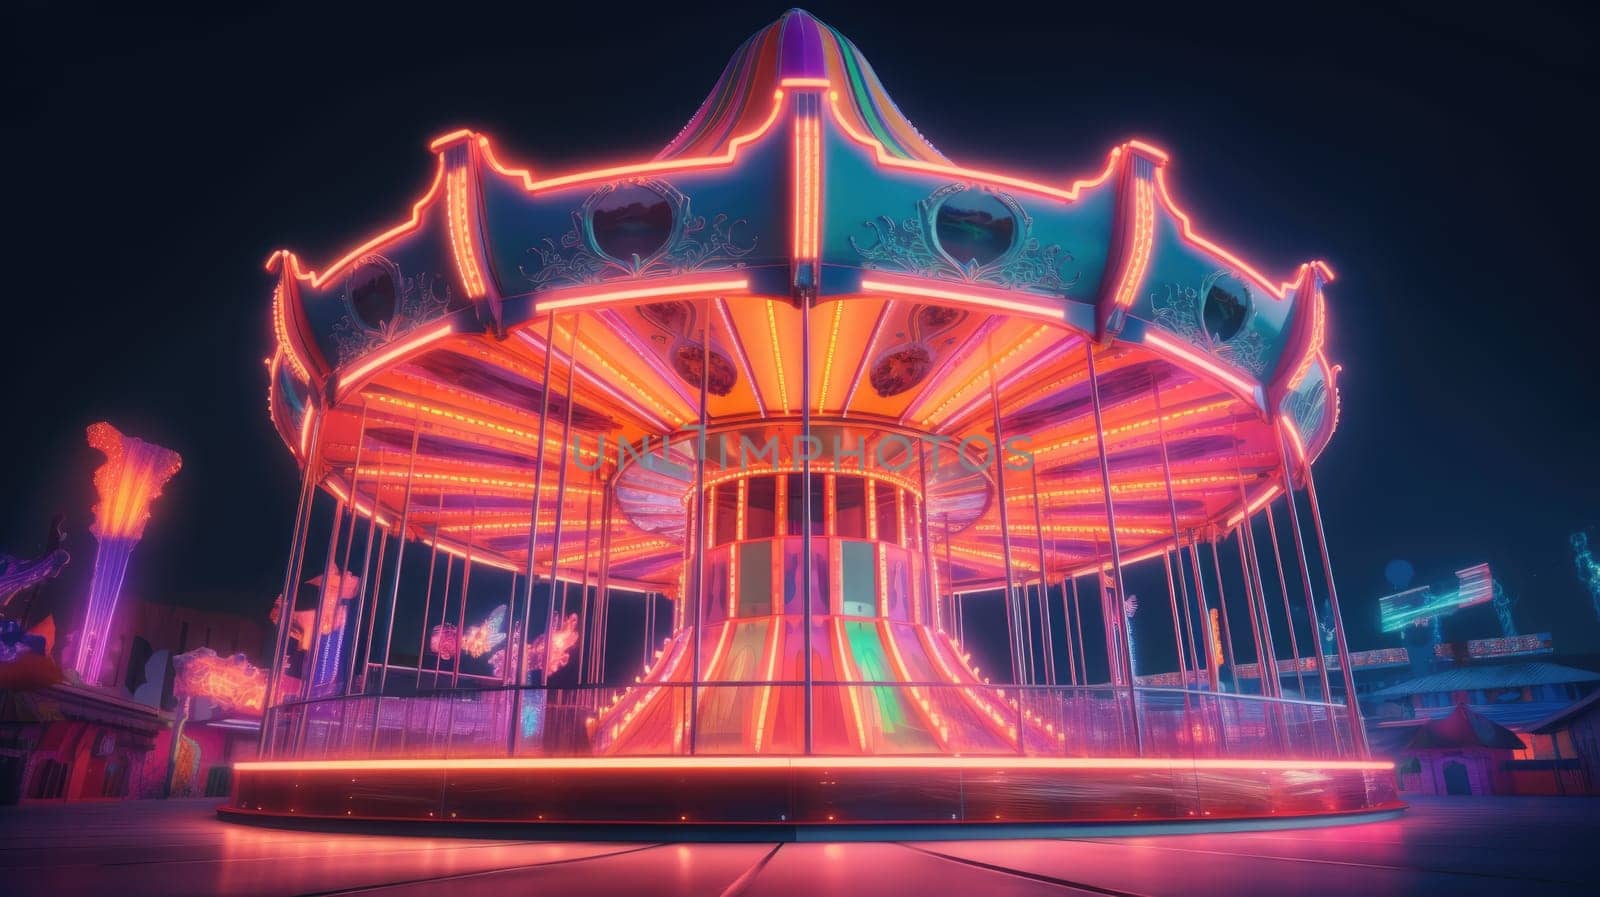 A vibrant carousel at night with retro charm, featuring colorful hues like pink, blue, orange, red, purple, and green, creating a mesmerizing and nostalgic atmosphere.